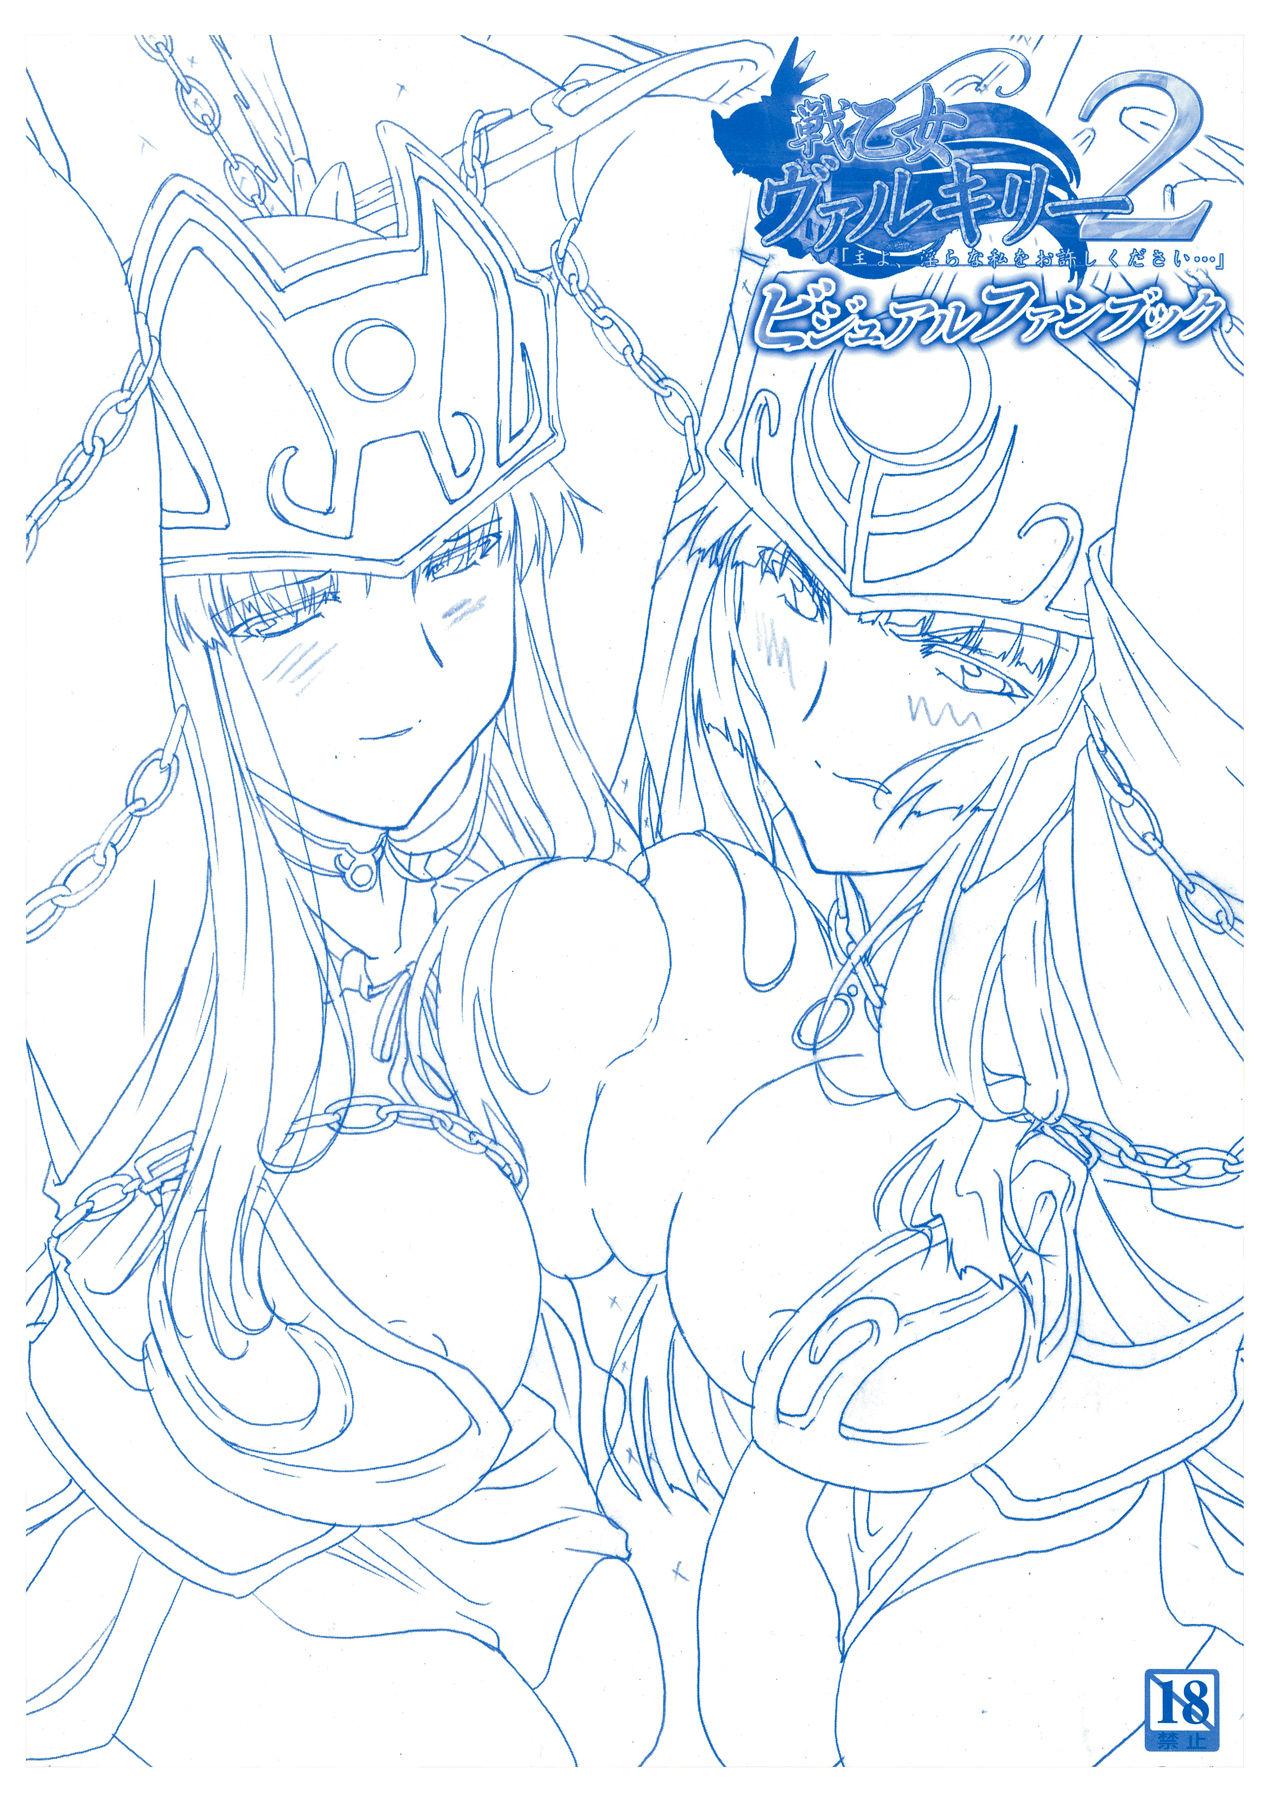 Oldyoung Ikusa Otome Valkyrie 2 Visual Fanbook - Ikusa otome valkyrie Web Cam - Page 2